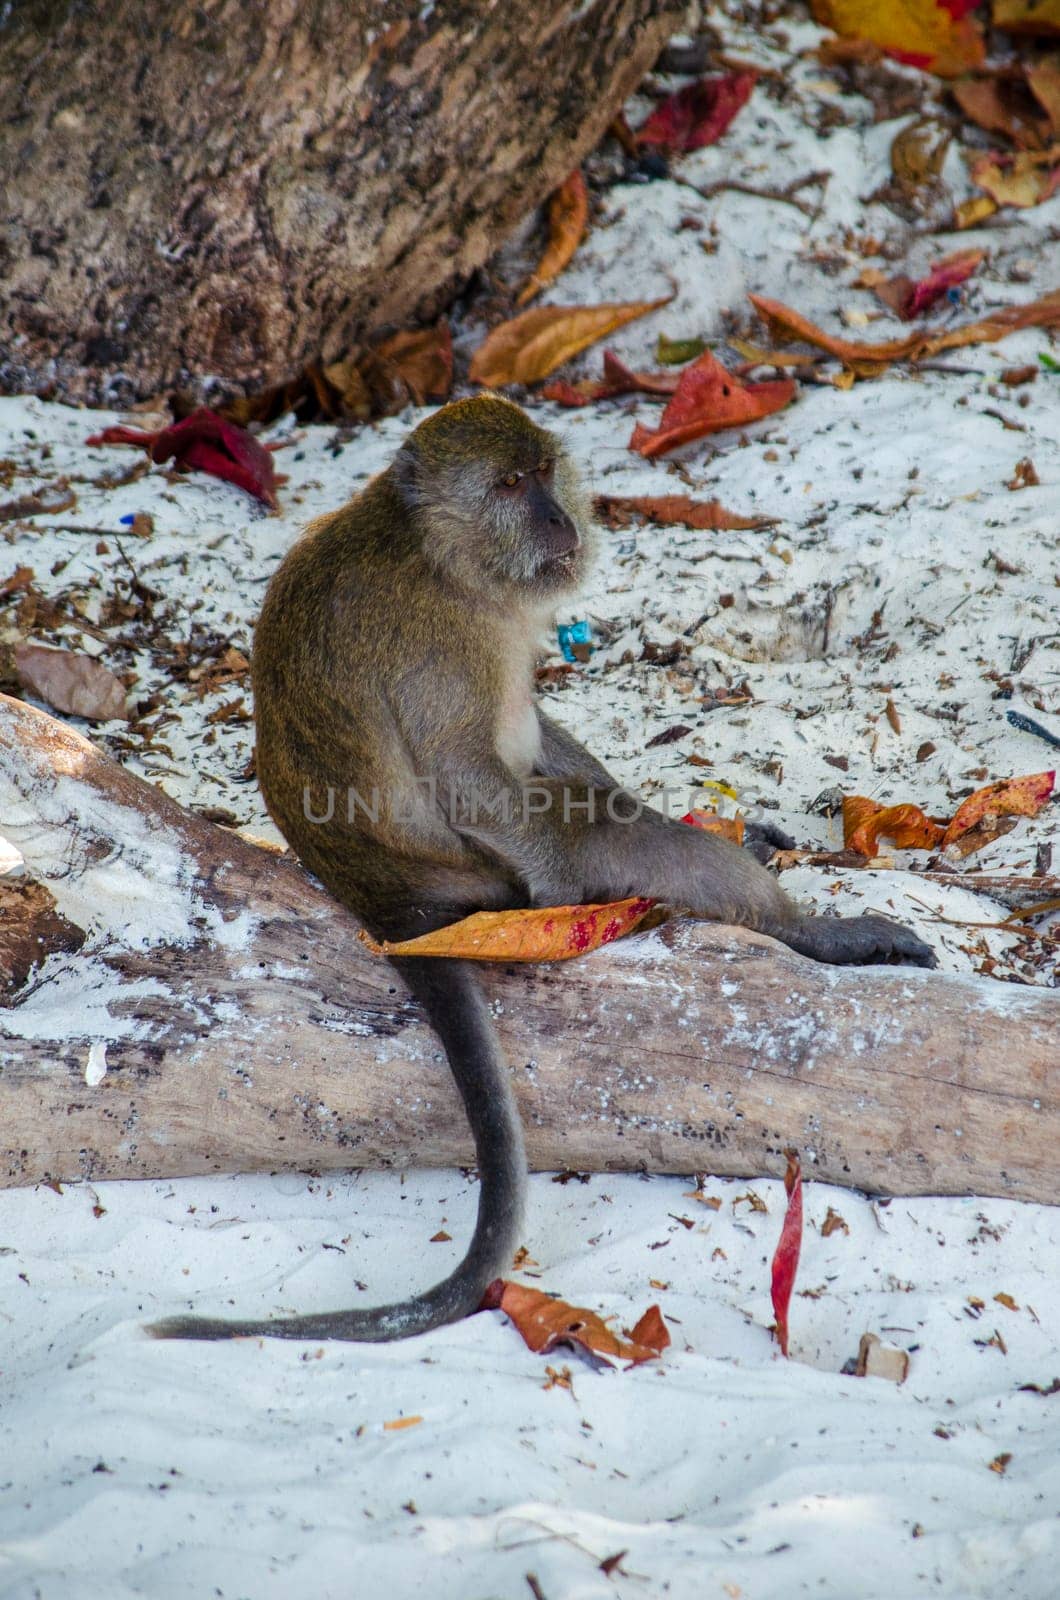 Wild white macaque monkey waiting on rocks at tropical island by lucia_fox